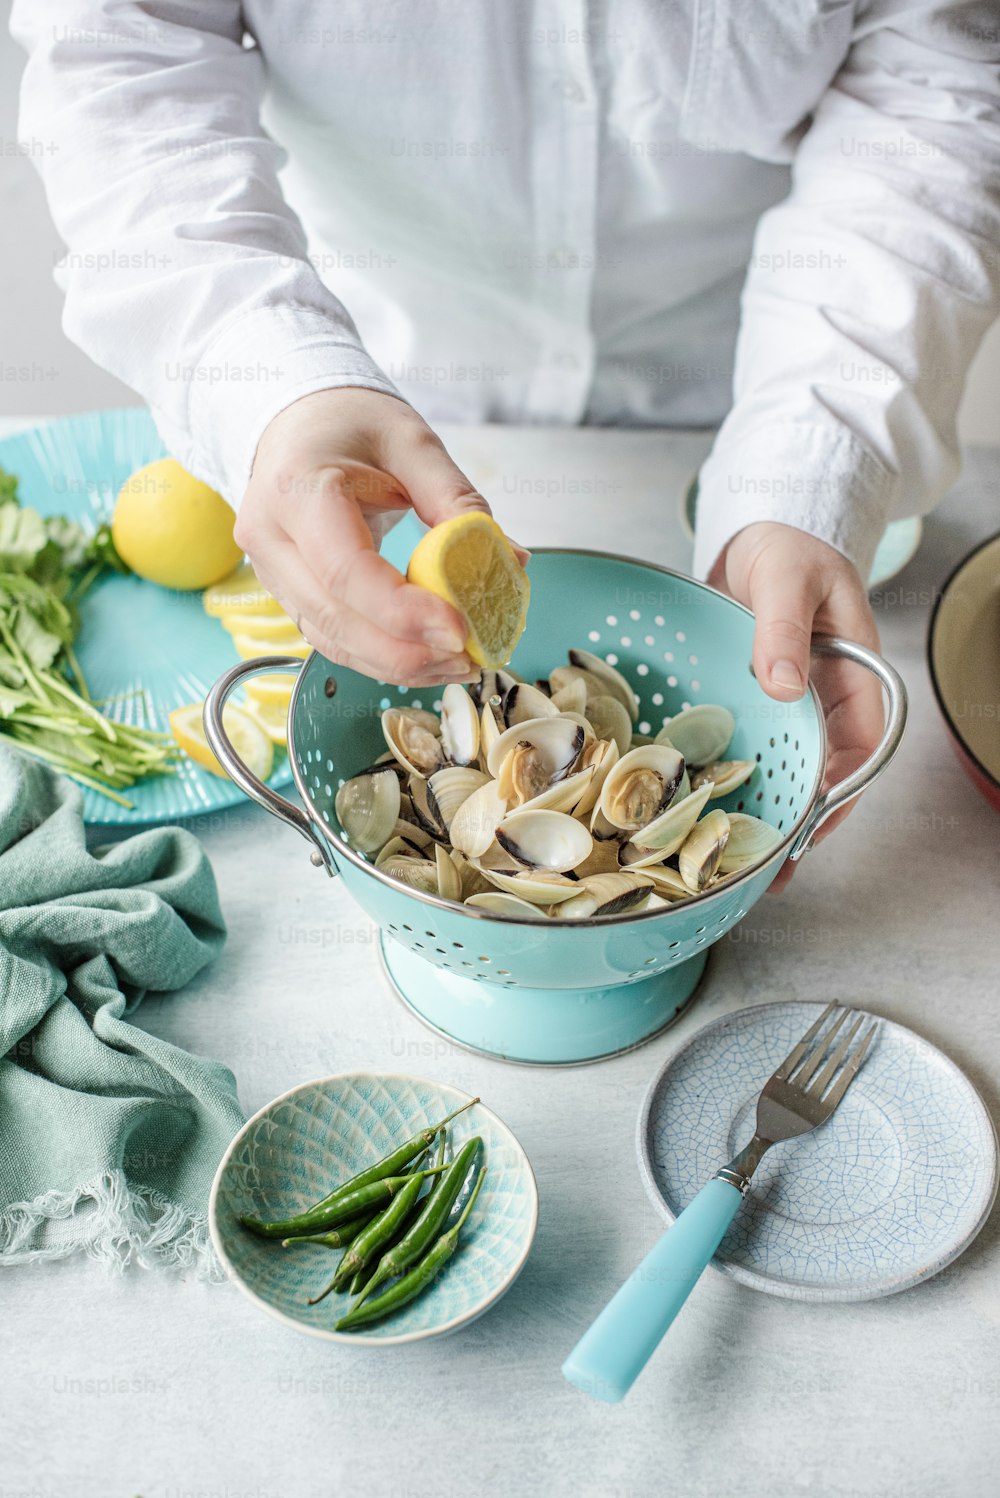 a person is adding a lemon to a bowl of clams